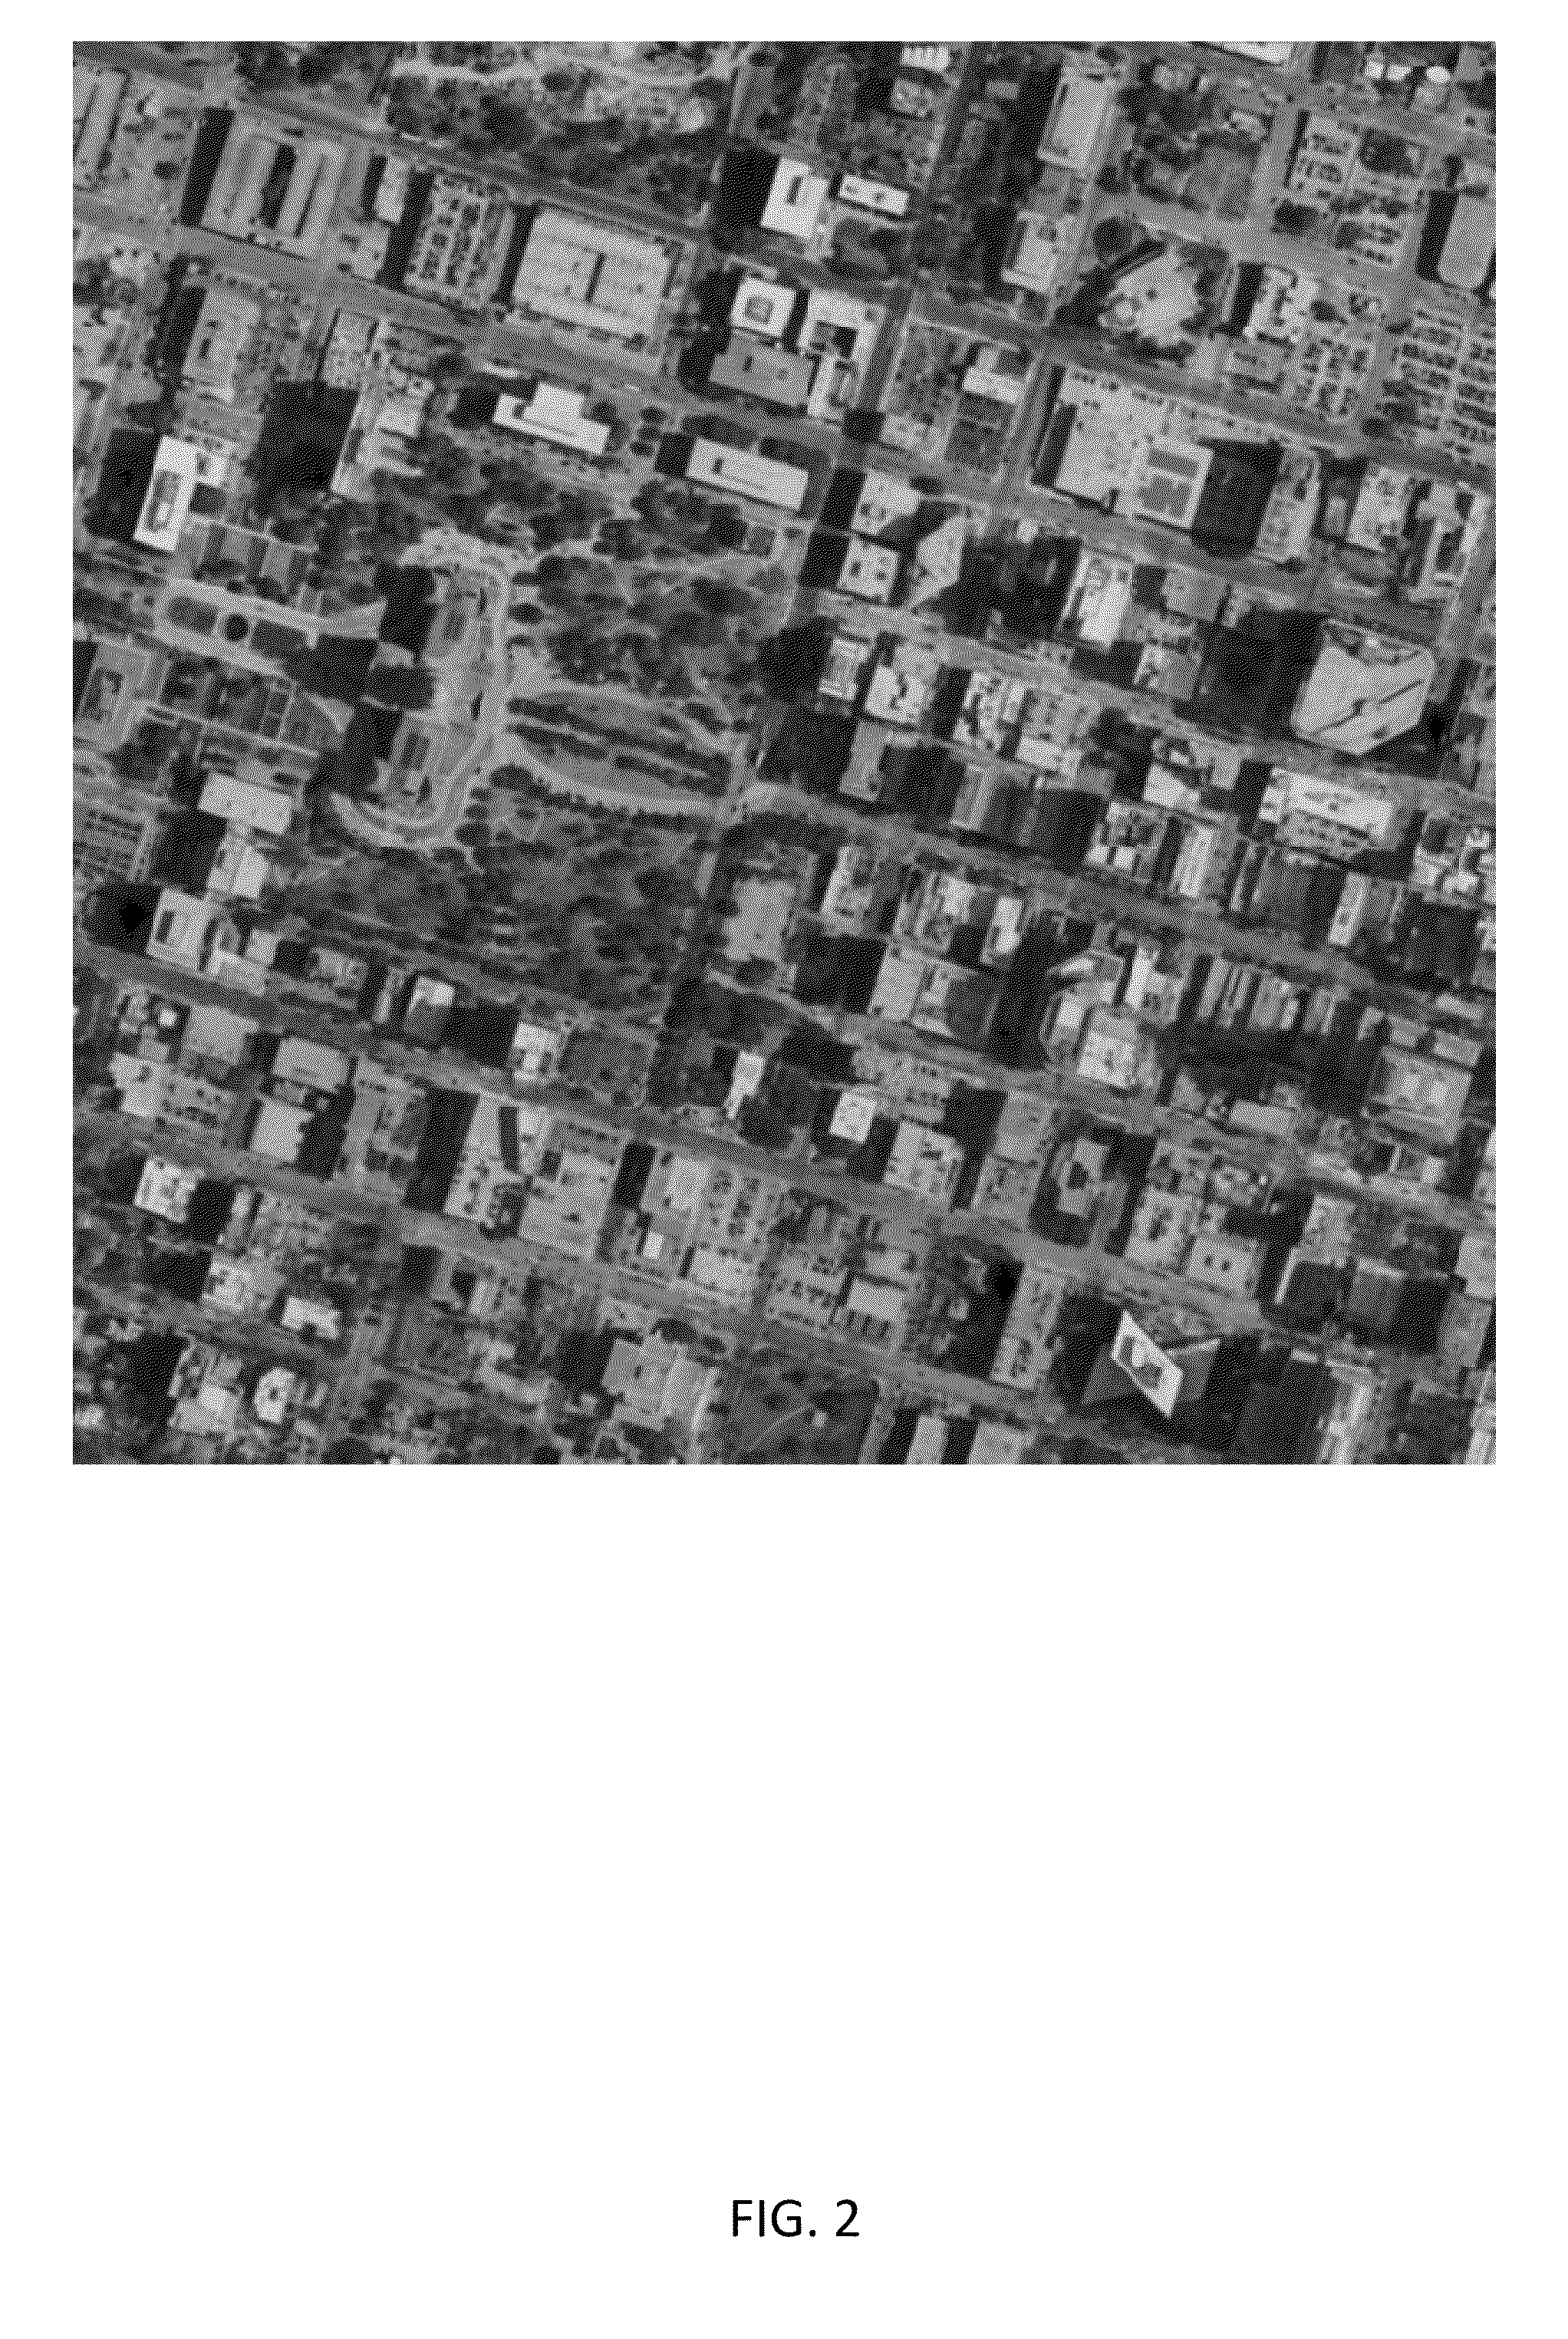 Systems and Methods for Refining an Aerial Image